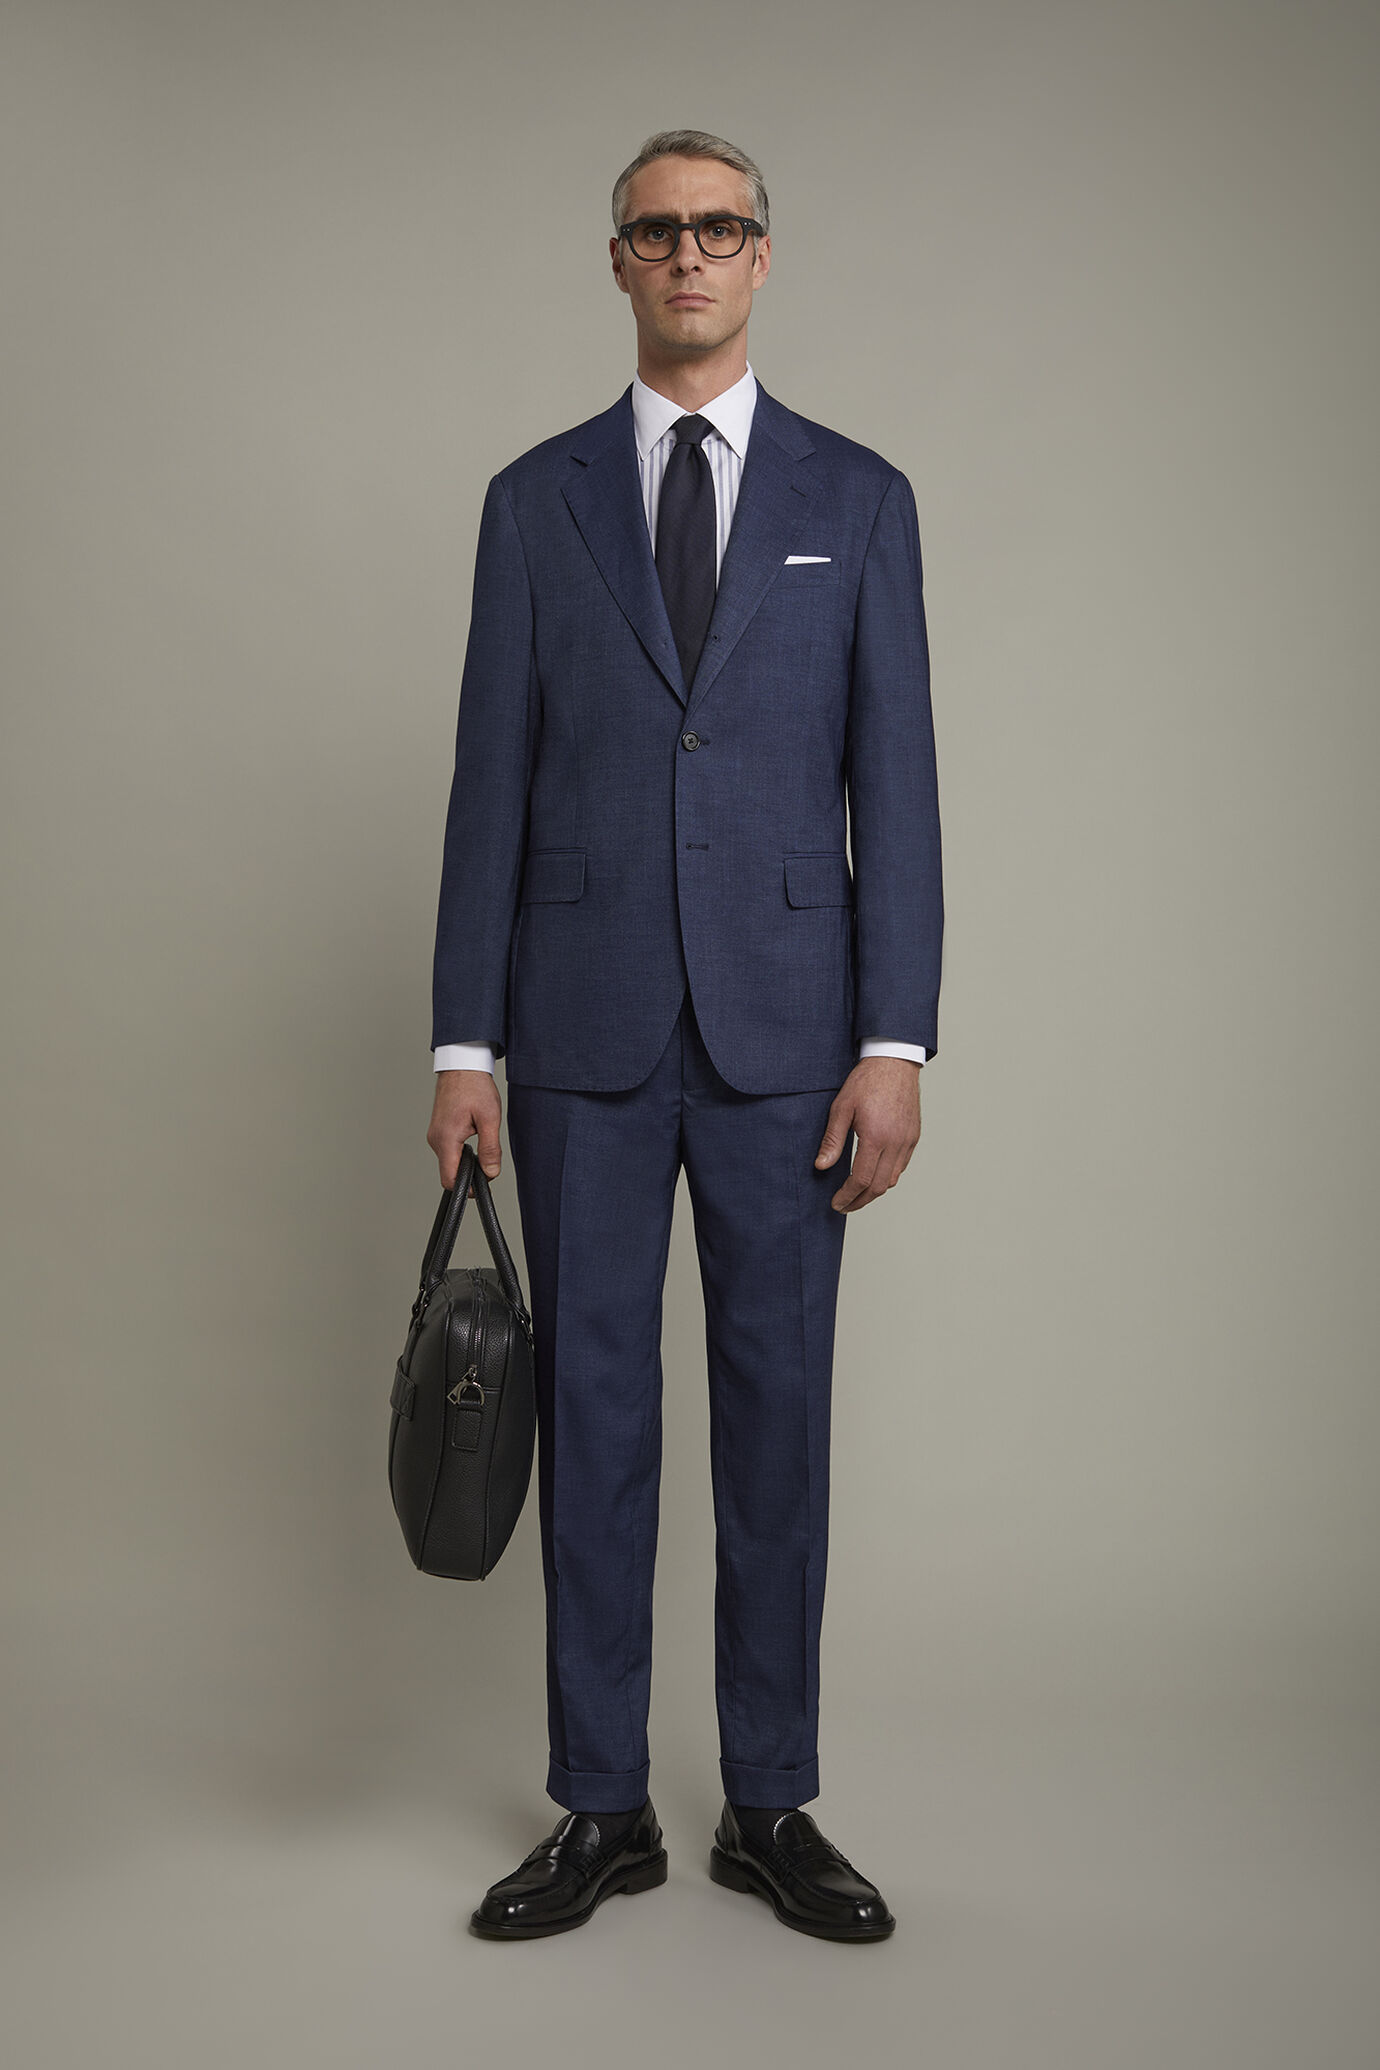 Men's single-breasted three-button regular fit suit